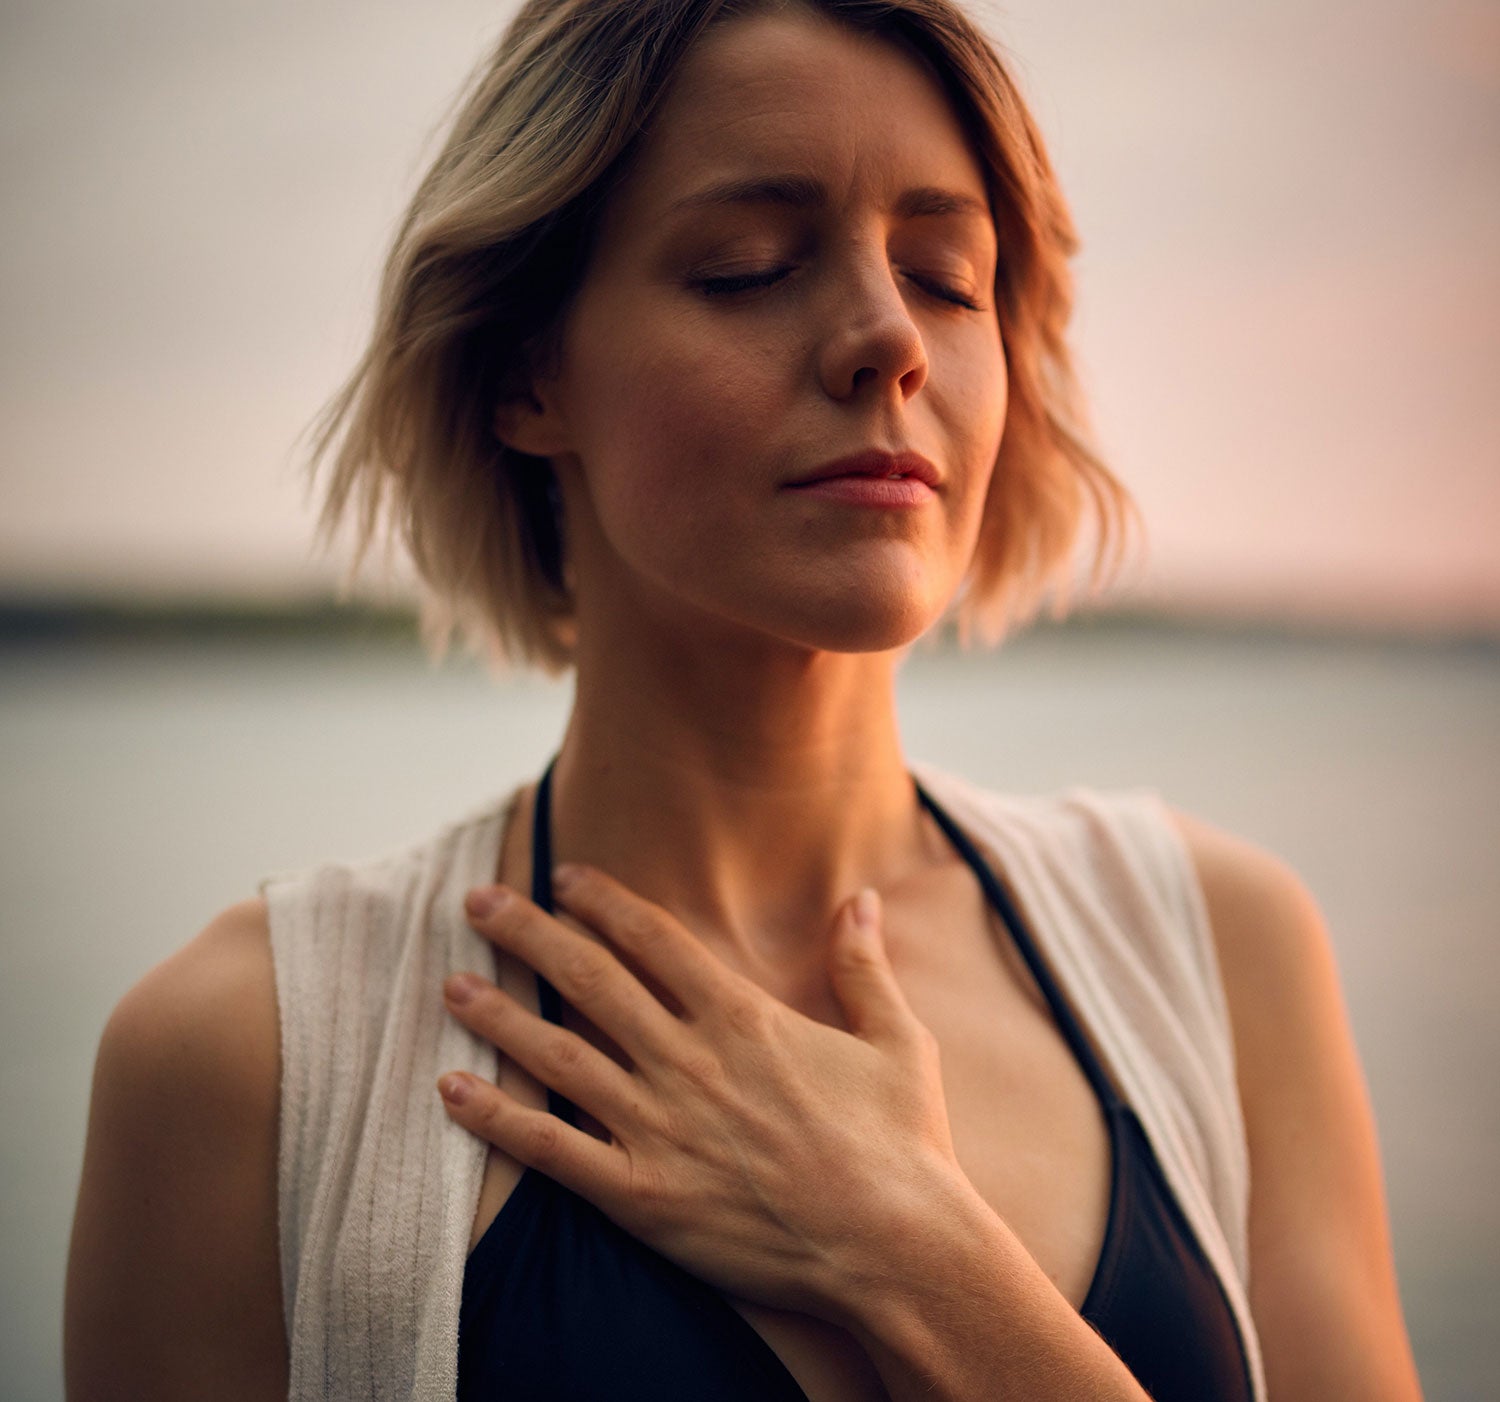 A blond woman in a black bikini top and white vest closes her eyes and places her hand on her chest. Image by Darius Bashar